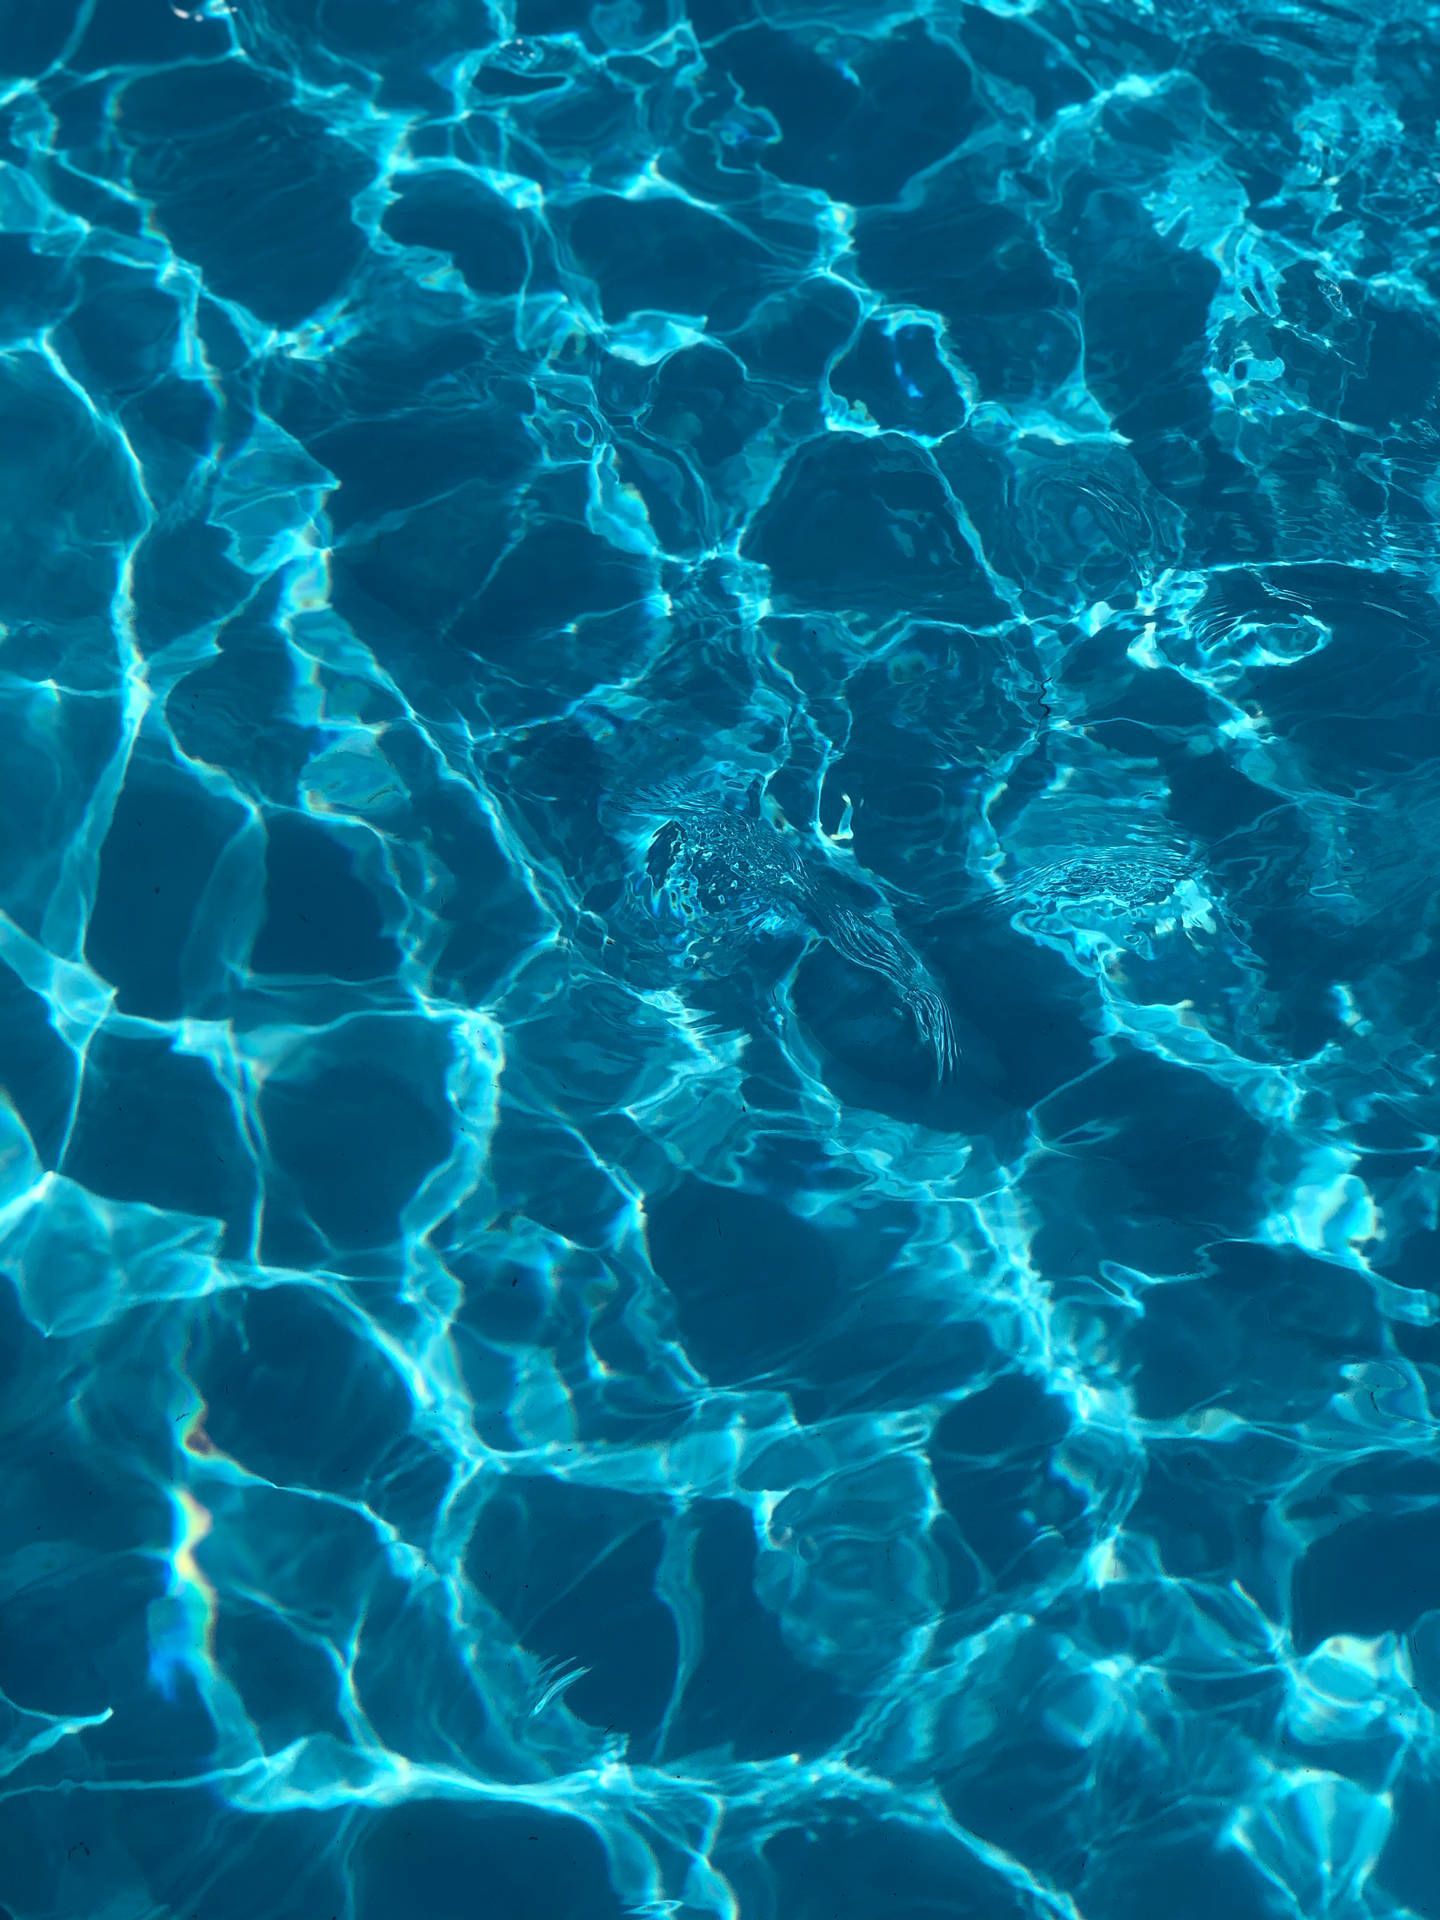 IPhone wallpaper of a pool with blue water and light reflecting on the surface. - Water, swimming pool